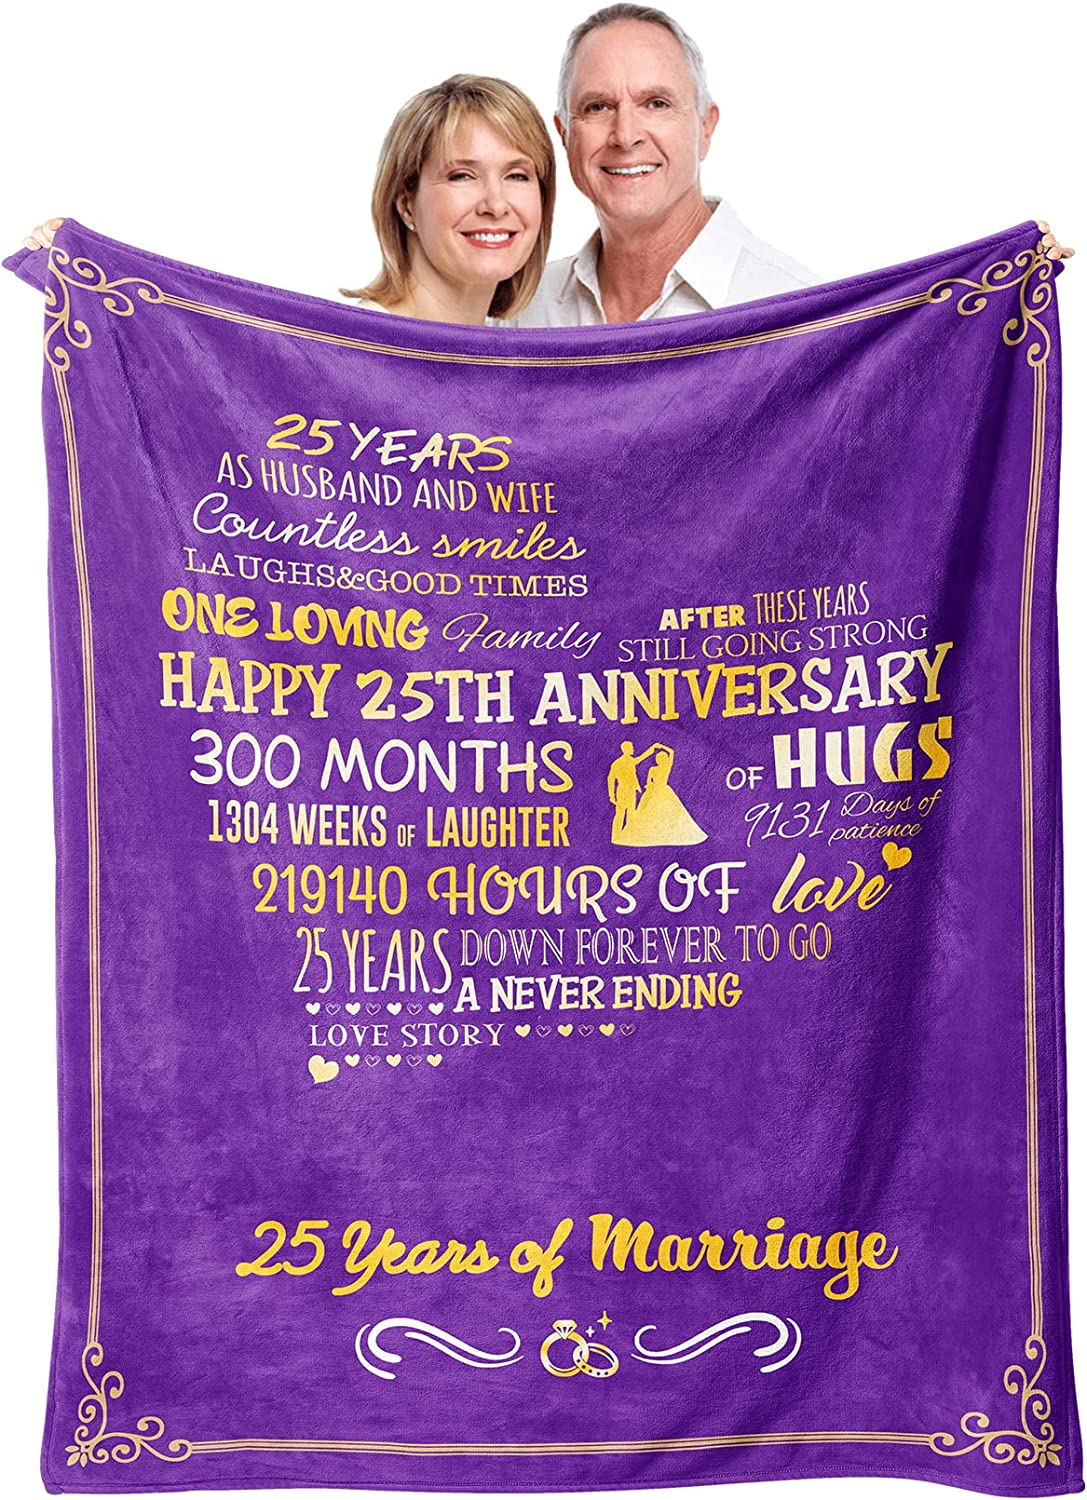 25Th Anniversary Blanket, 25Th Silver Wedding Anniversary Couple Gifts For Dad Mom Parents Friends, 25 Years Of Marriage Throw Blankets Gift For Husband Wife Her/Him